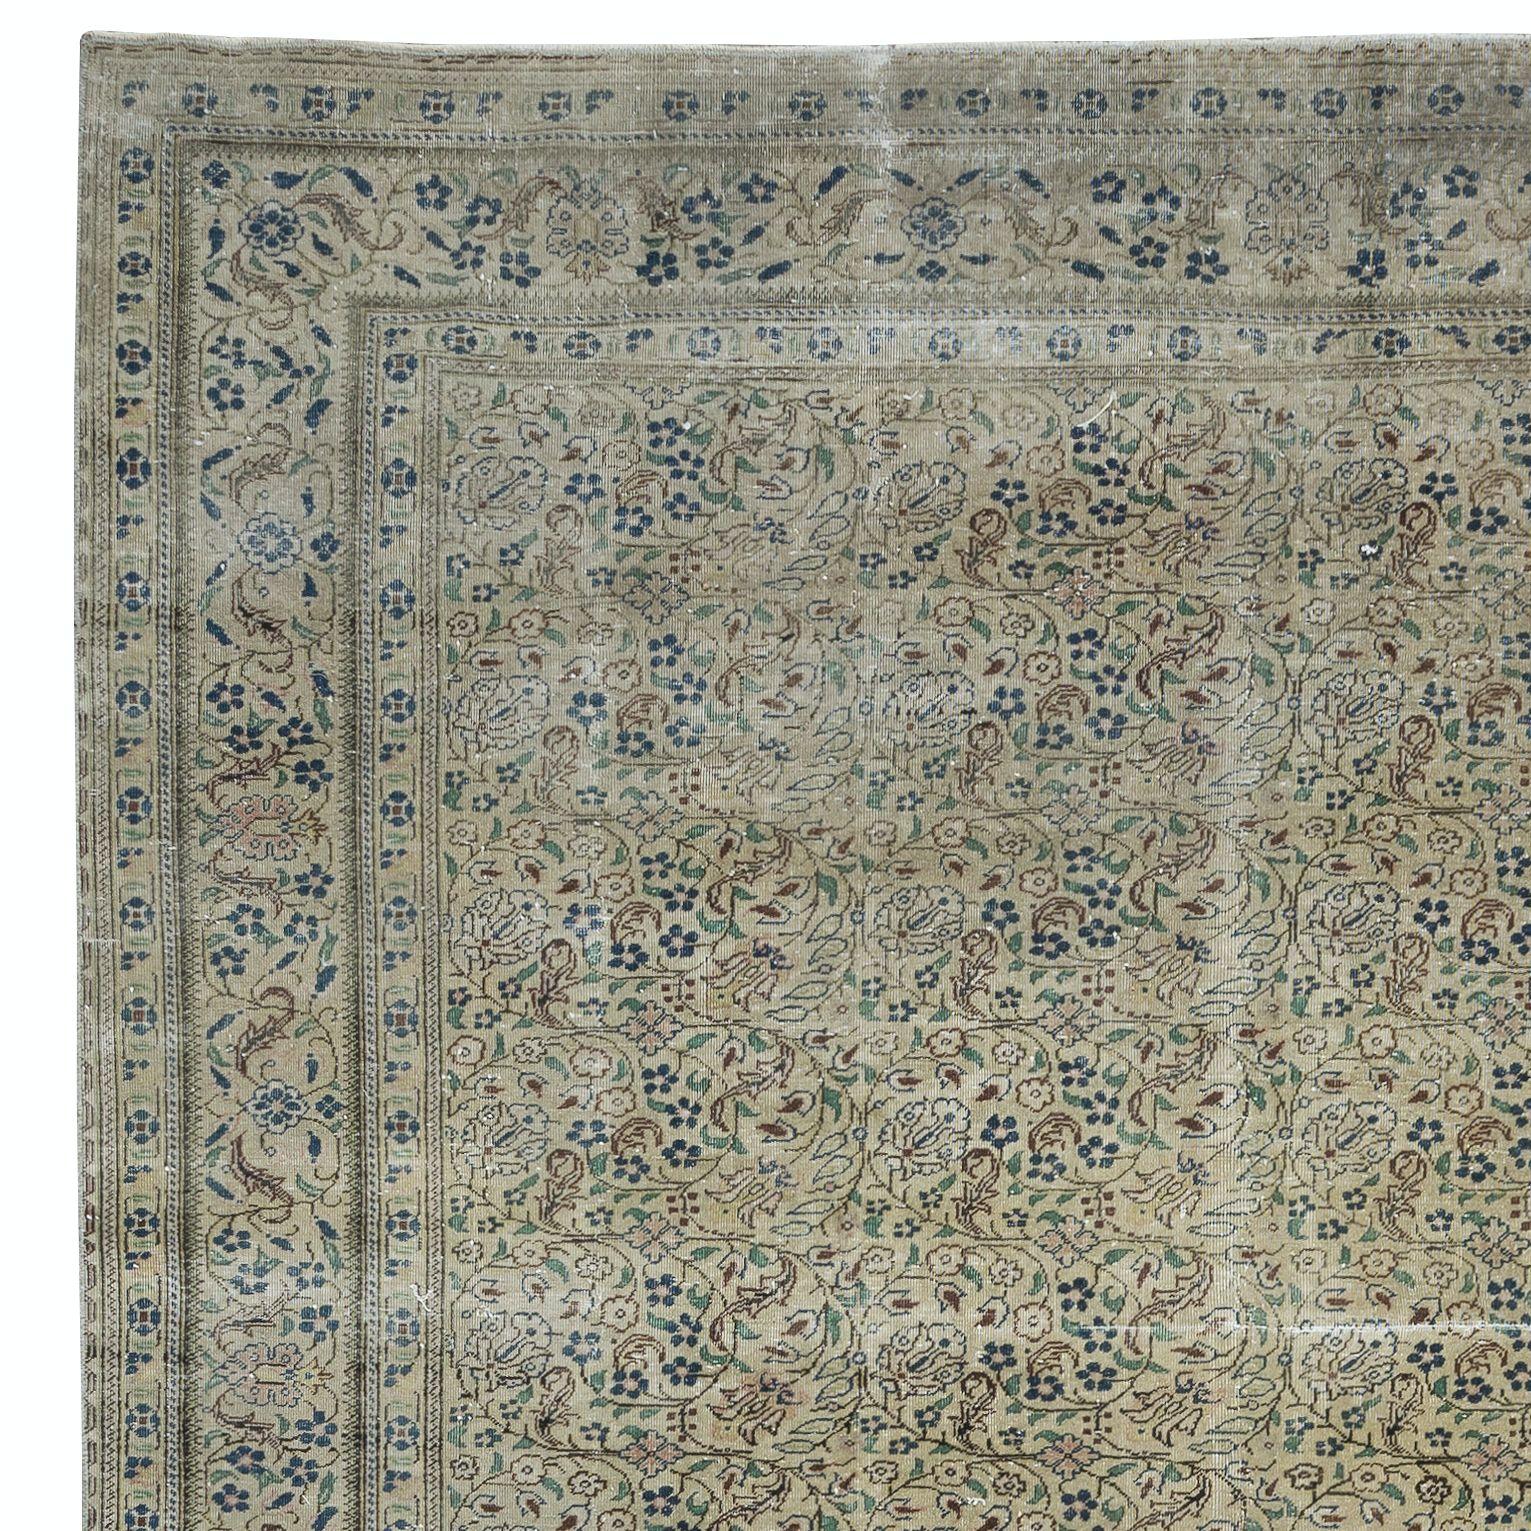 Hand-Knotted 7.6x11.3 Ft Unique Vintage Turkish Floral Rug in Beige, Navy Blue & Green For Sale